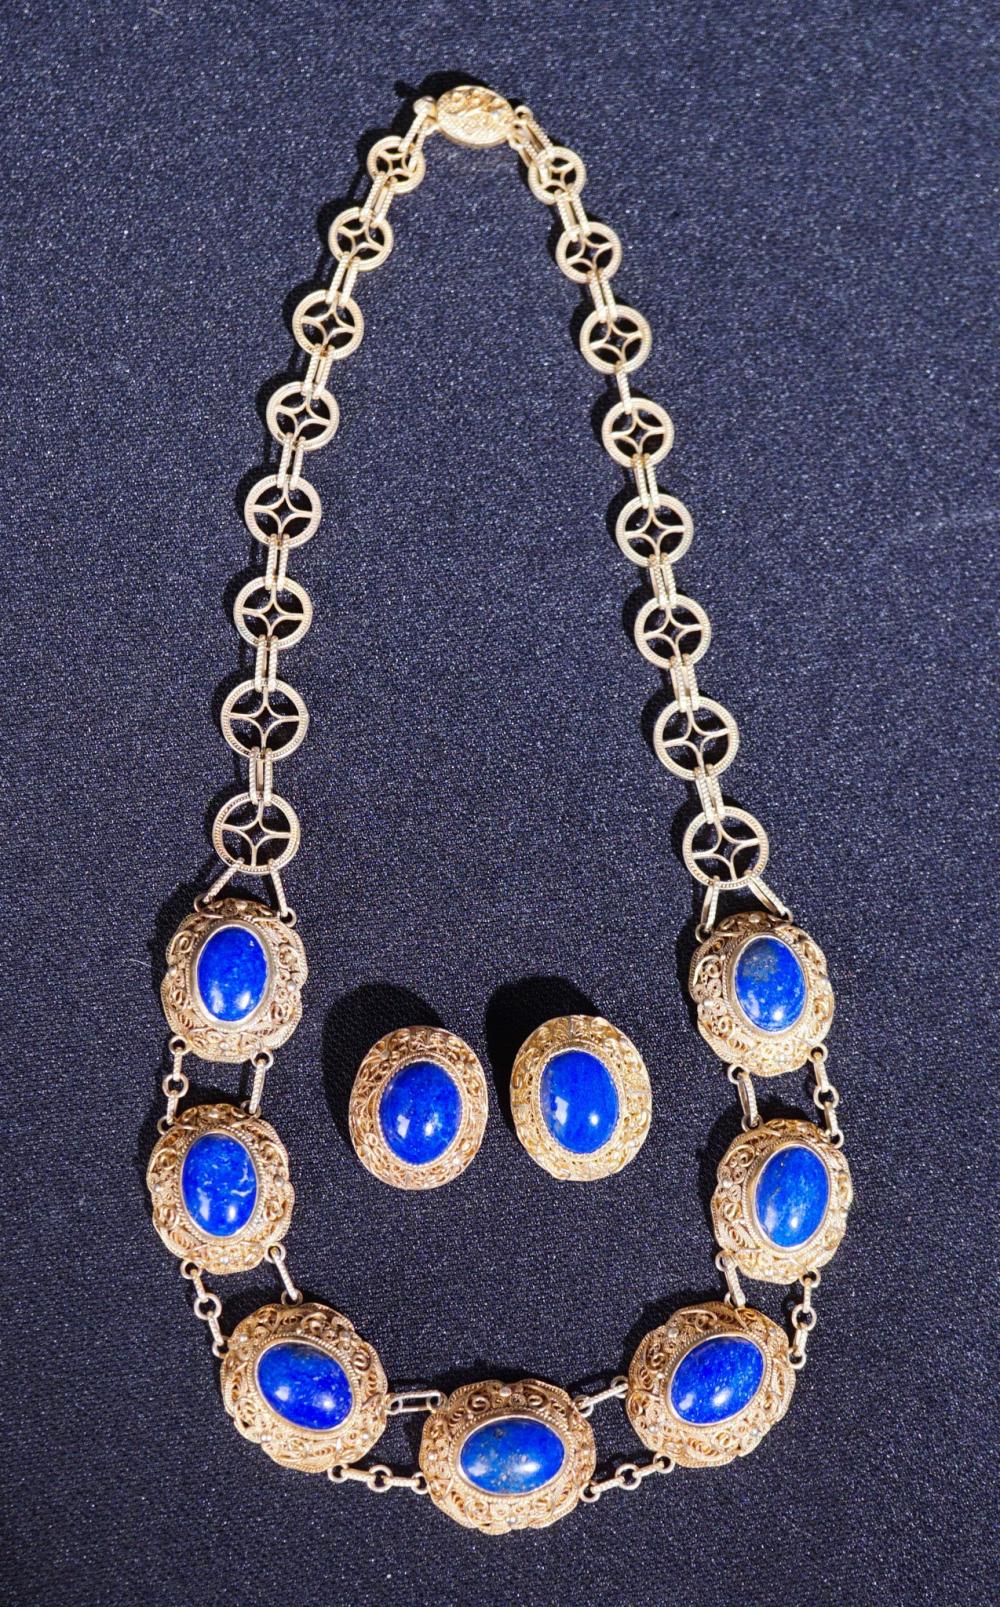 SILVER GILT AND LAPIS LAZULI NECKLACE